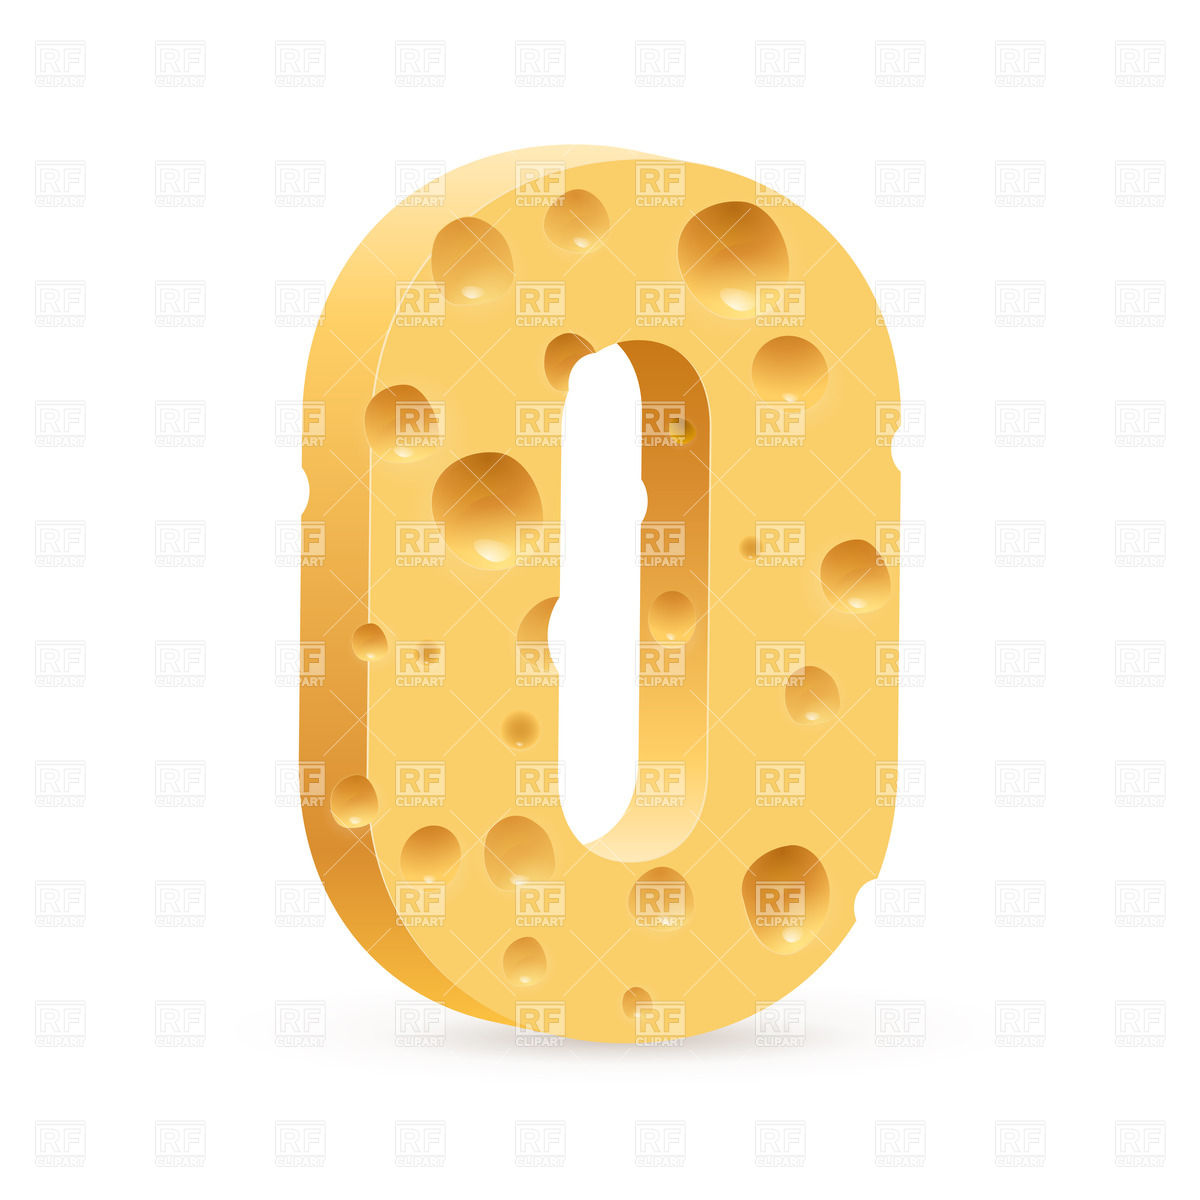 Zero Made Of Cheese Signs Symbols Maps Download Royalty Free